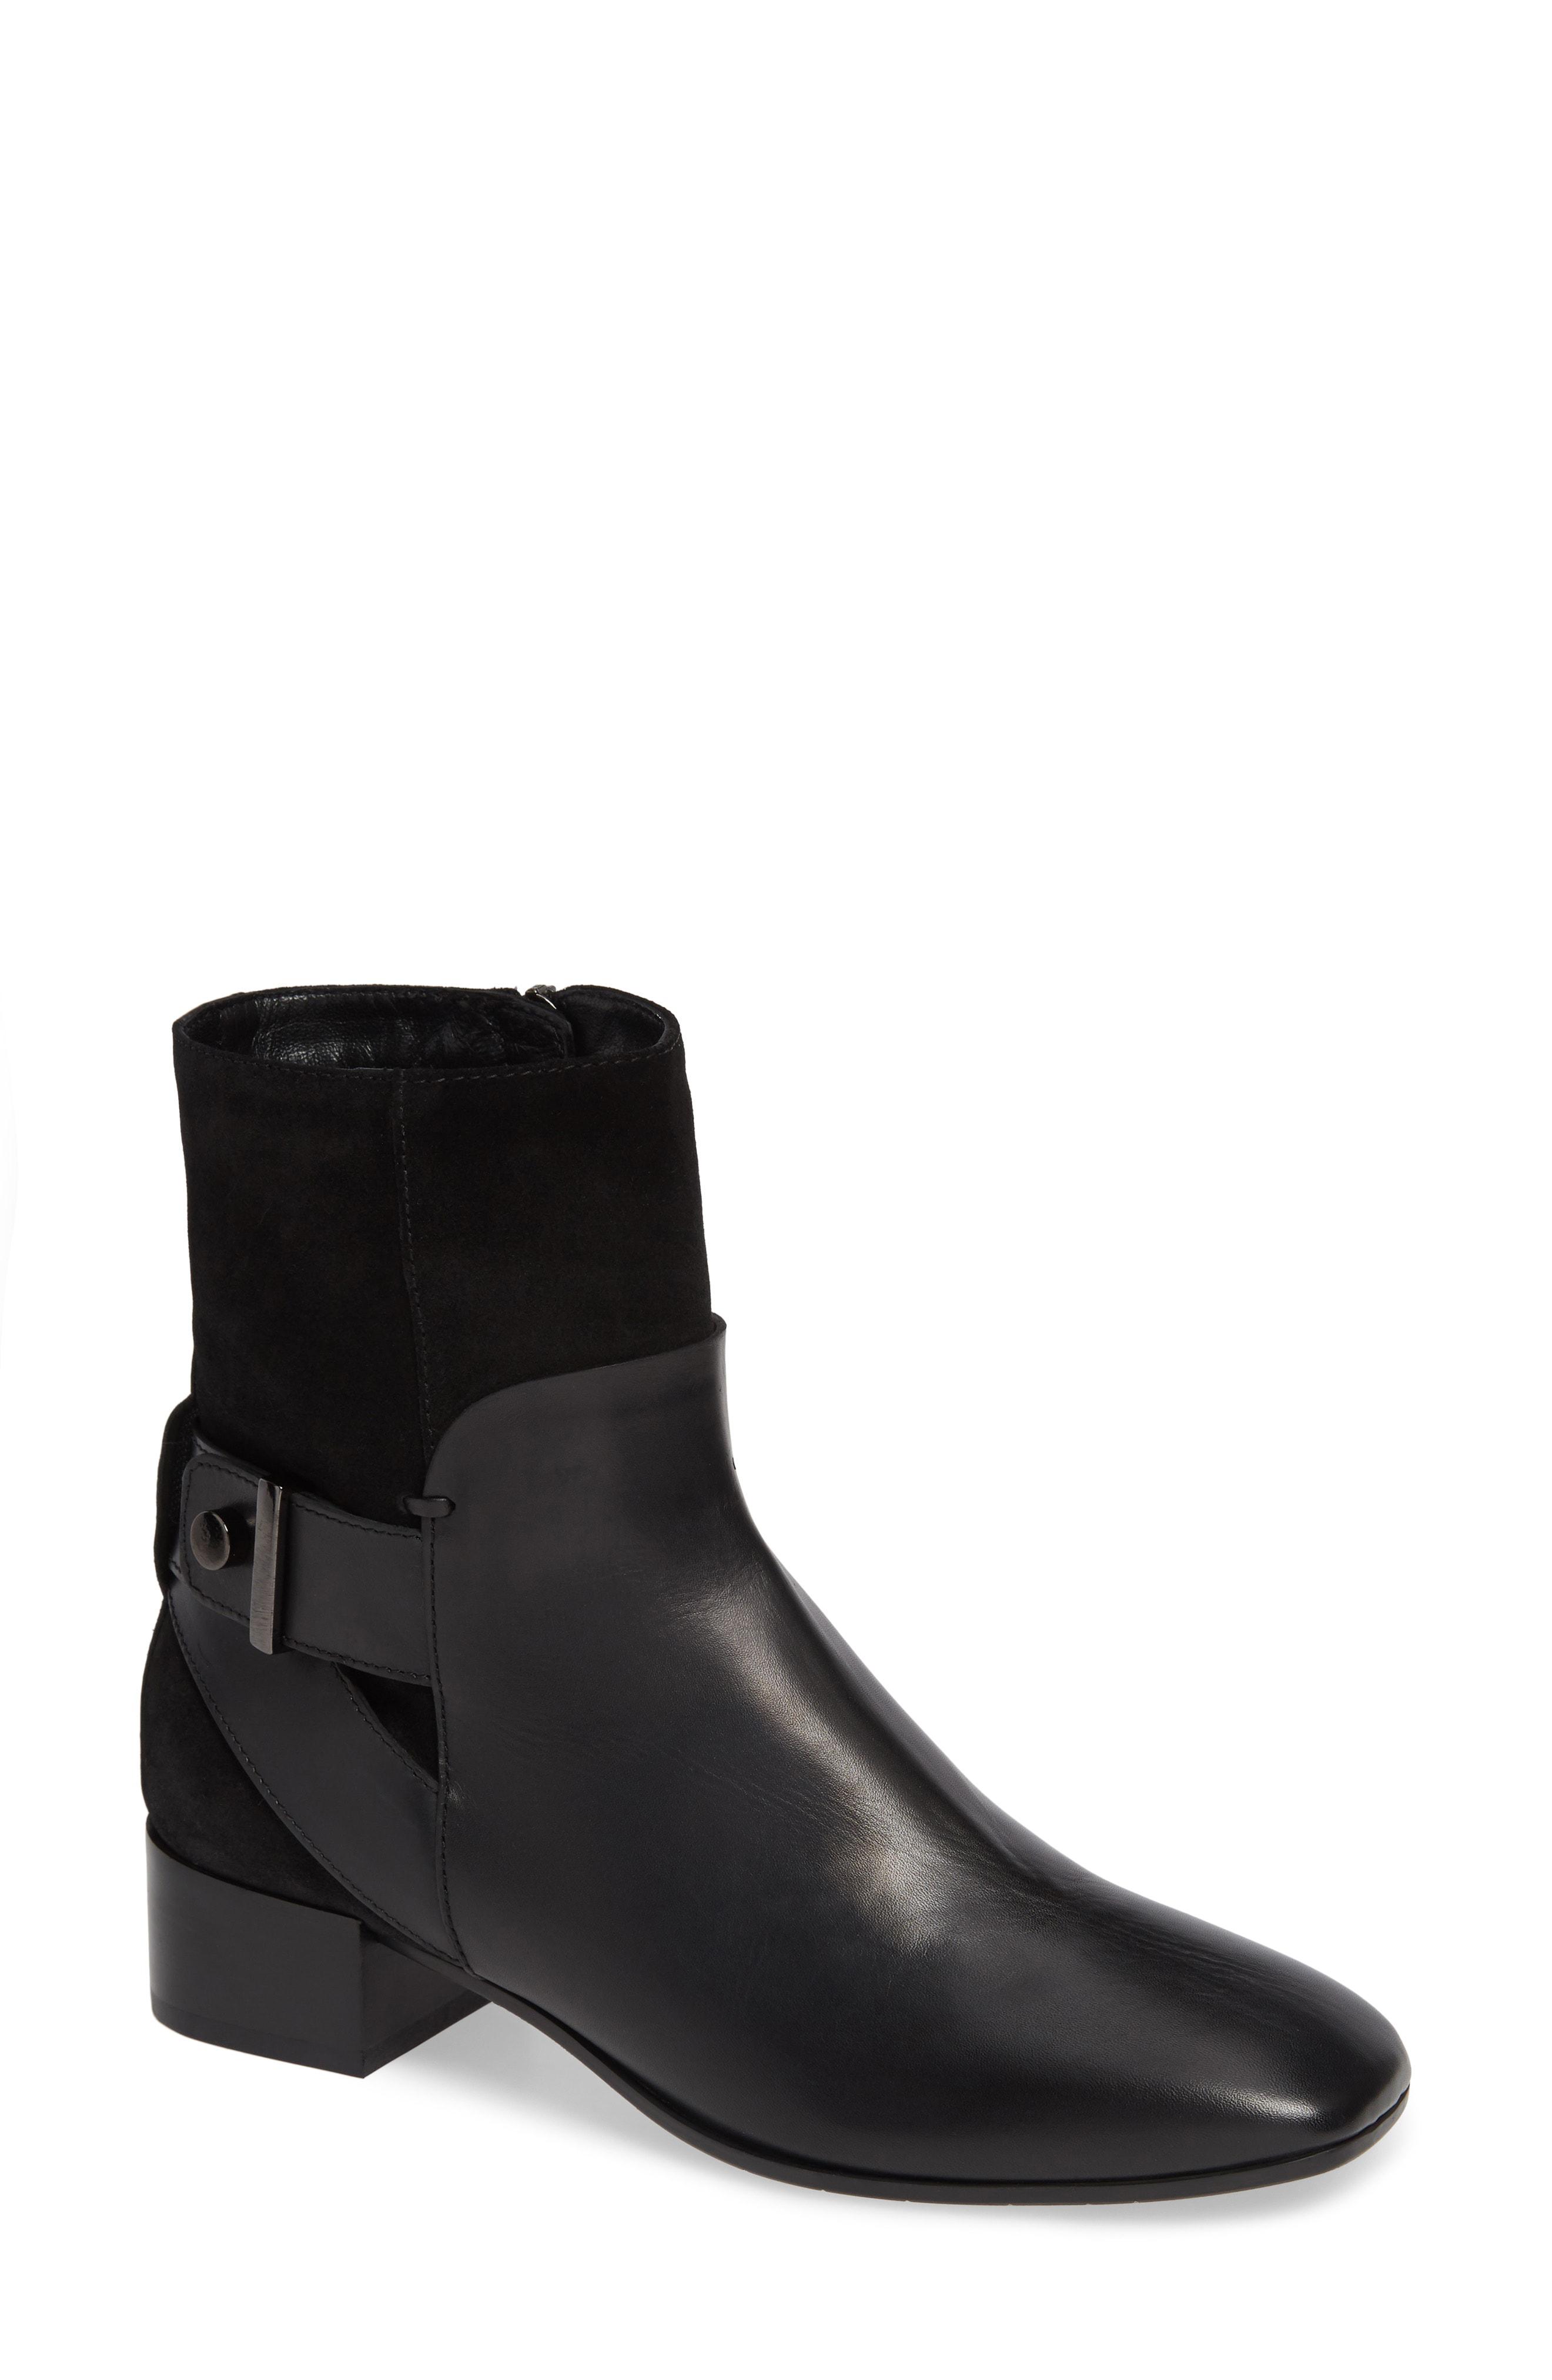 Aquatalia Leather Lilly Water Resistant Boot in Black - Lyst